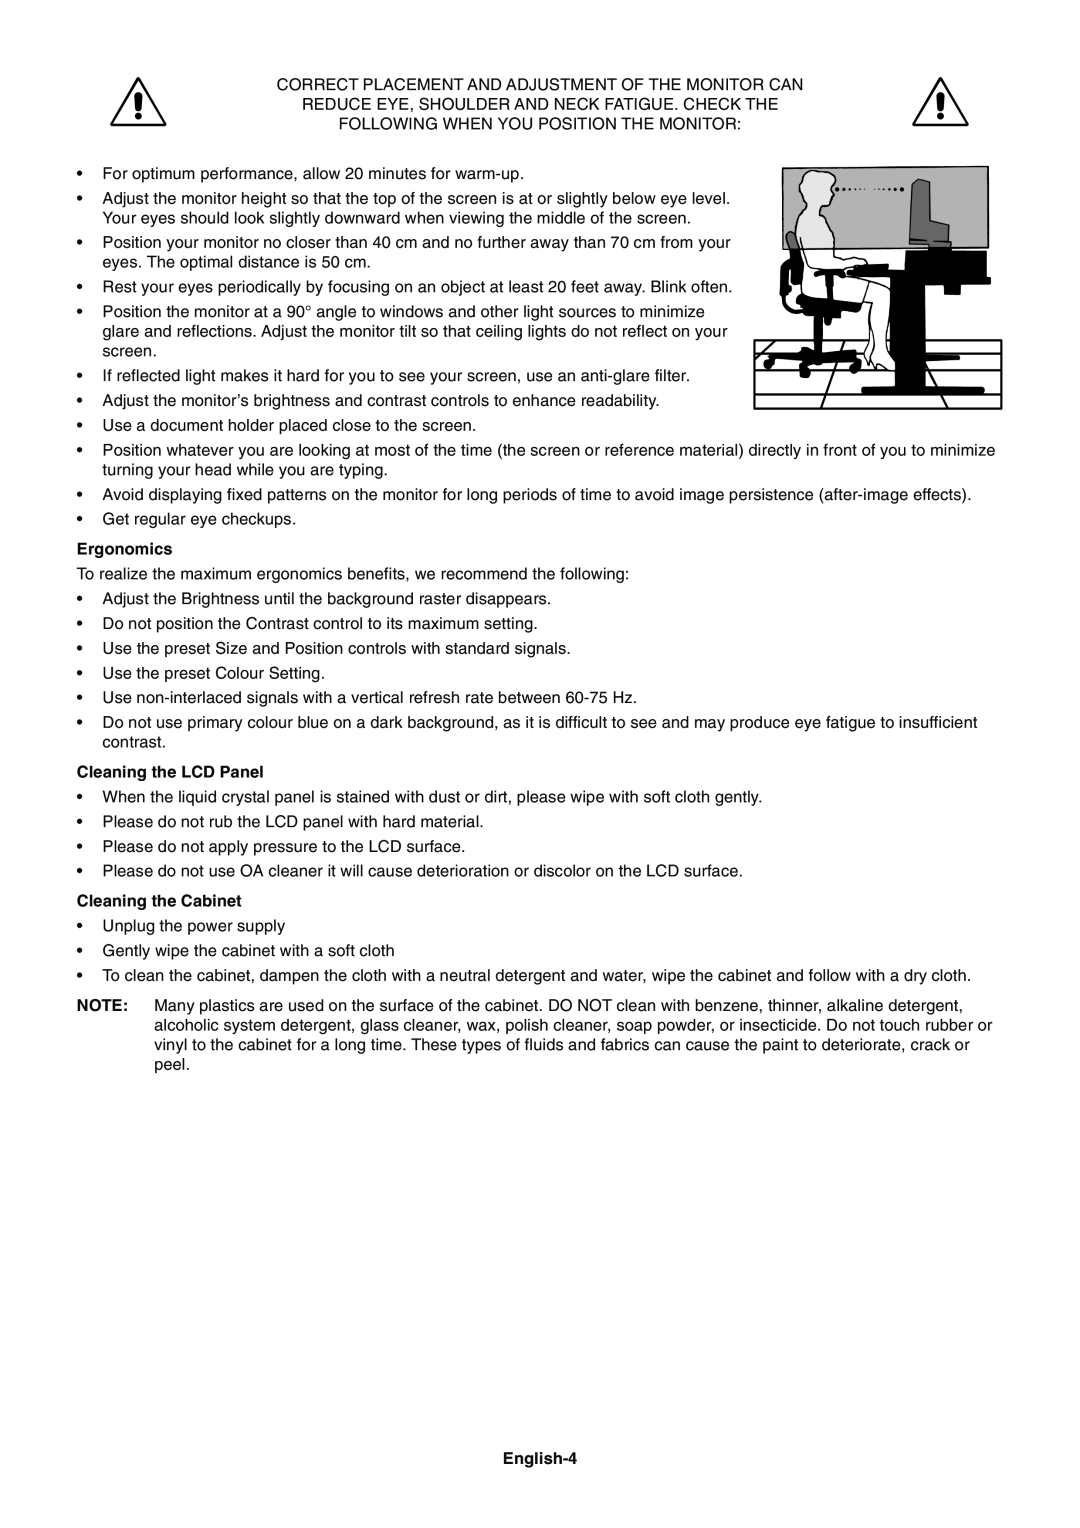 NEC E231W-BK user manual Ergonomics, Cleaning the LCD Panel, Cleaning the Cabinet, English-4 